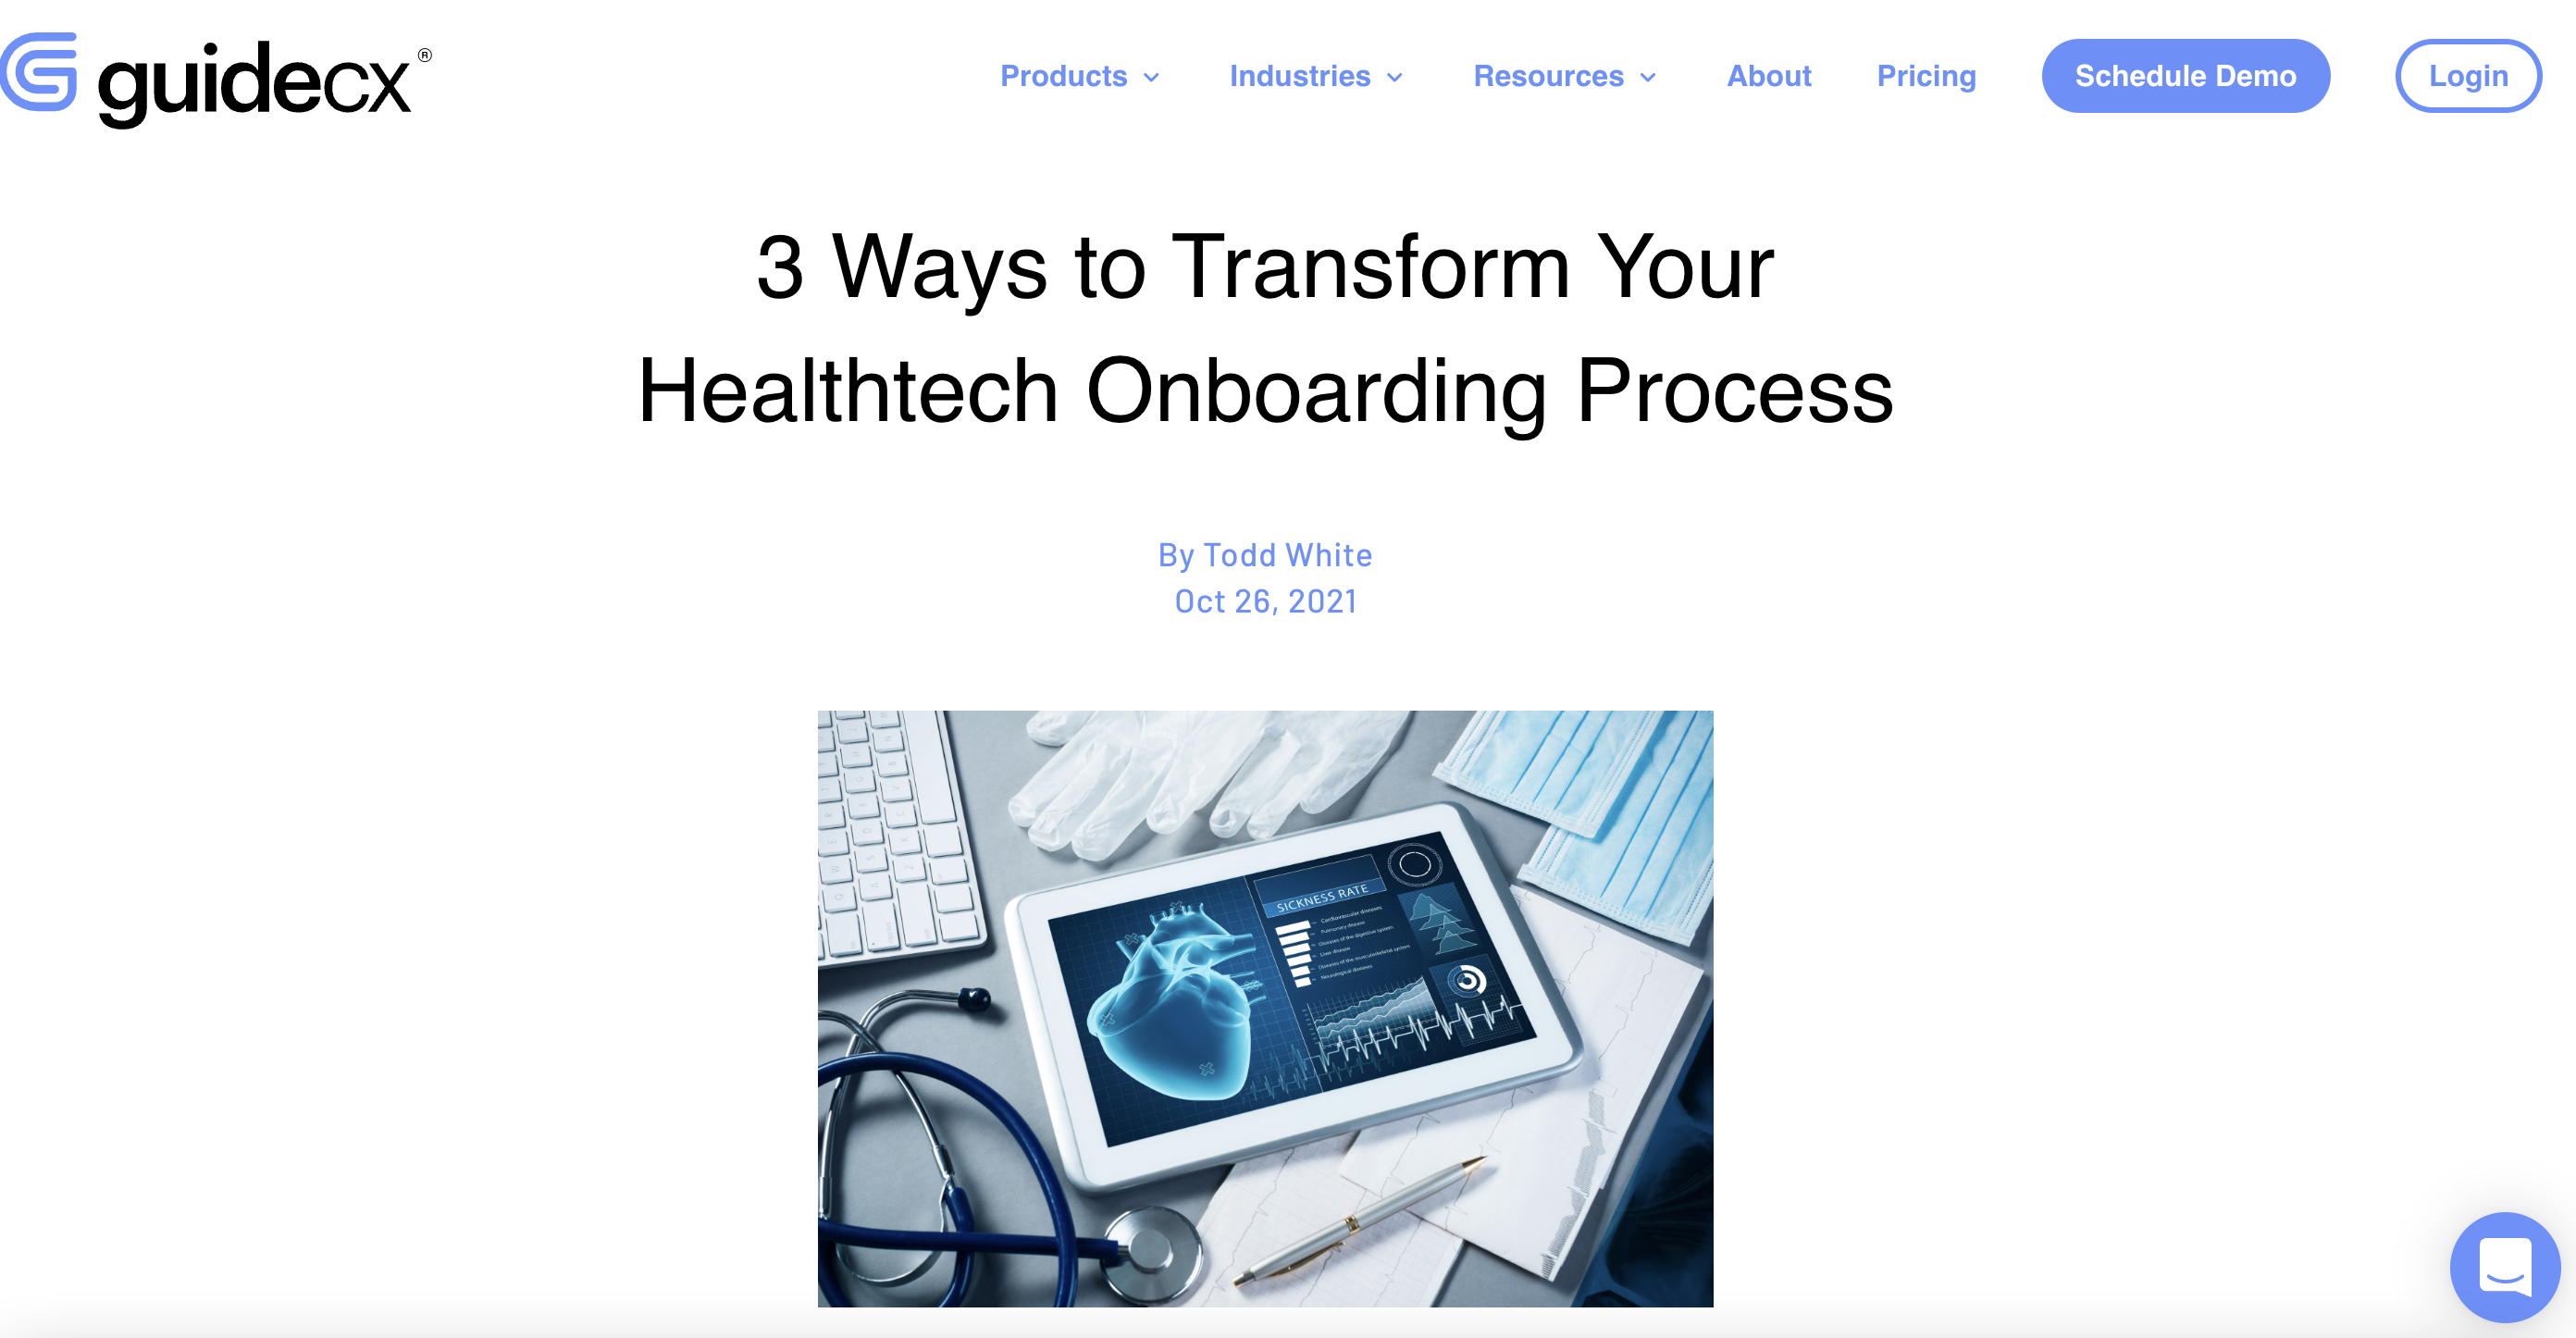 3 Ways to Transform Your Healthtech Onboarding Process